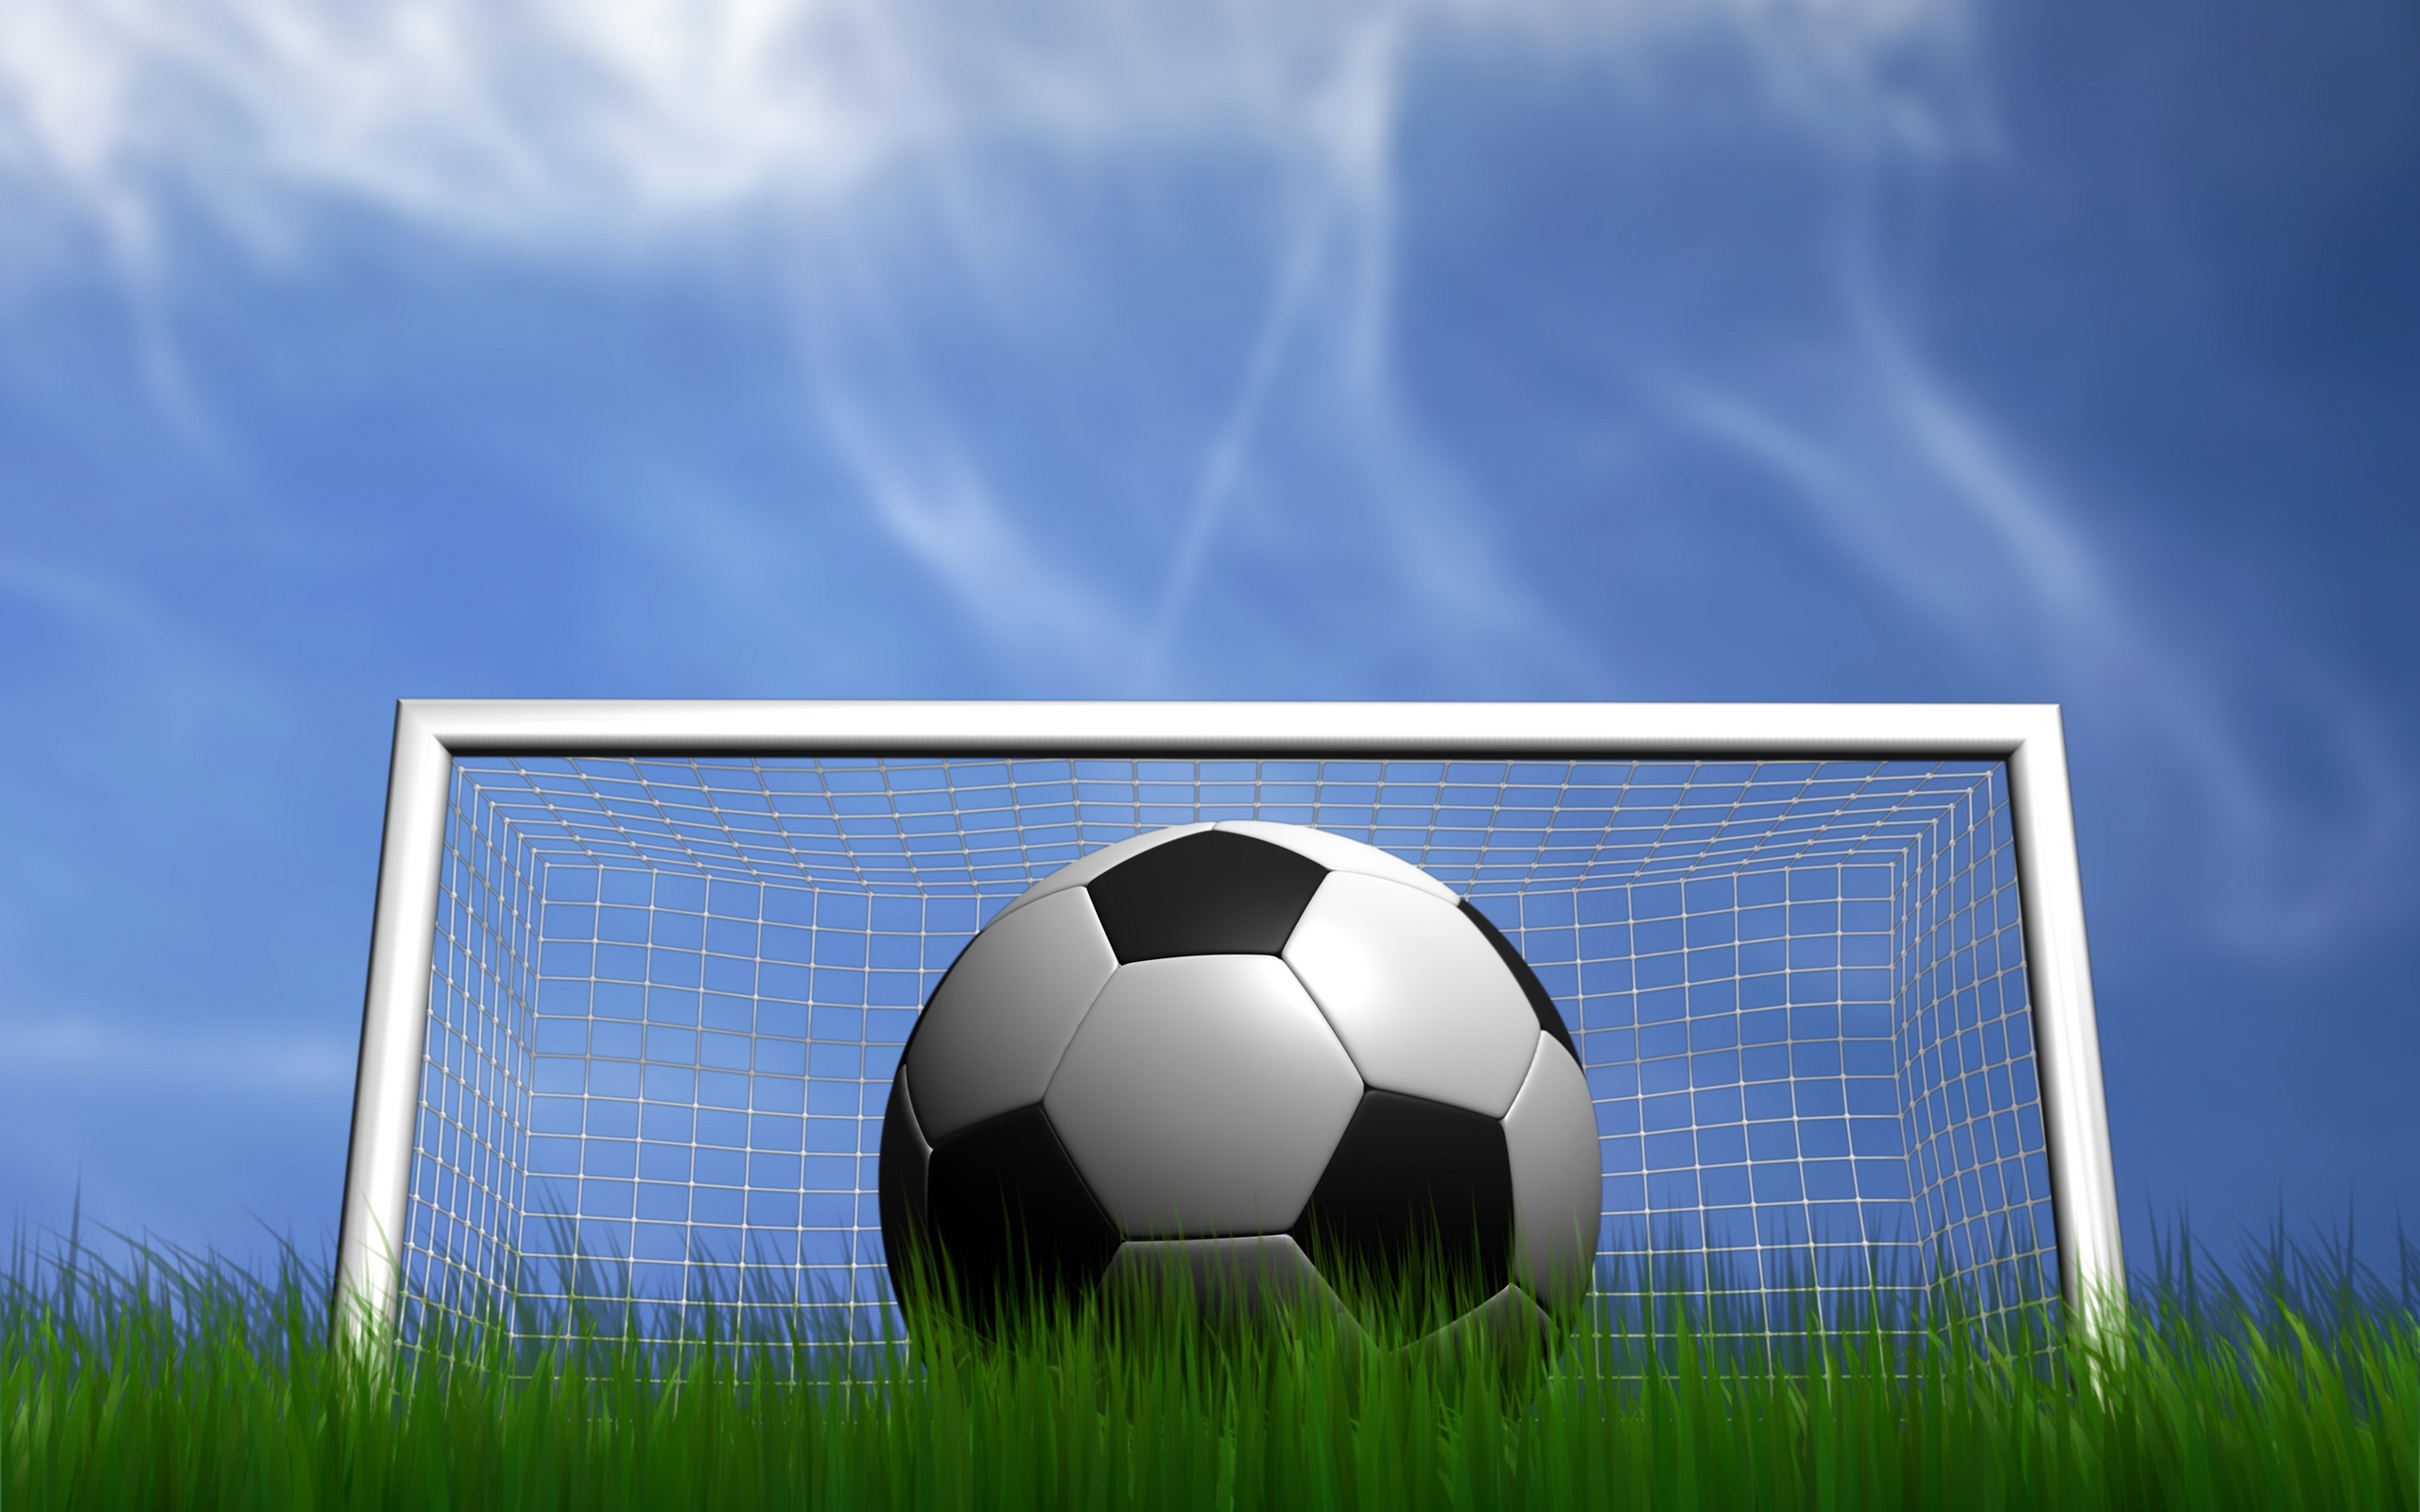 Wallpaper White and Black Soccer Ball on Green Grass Field, Background Free Image